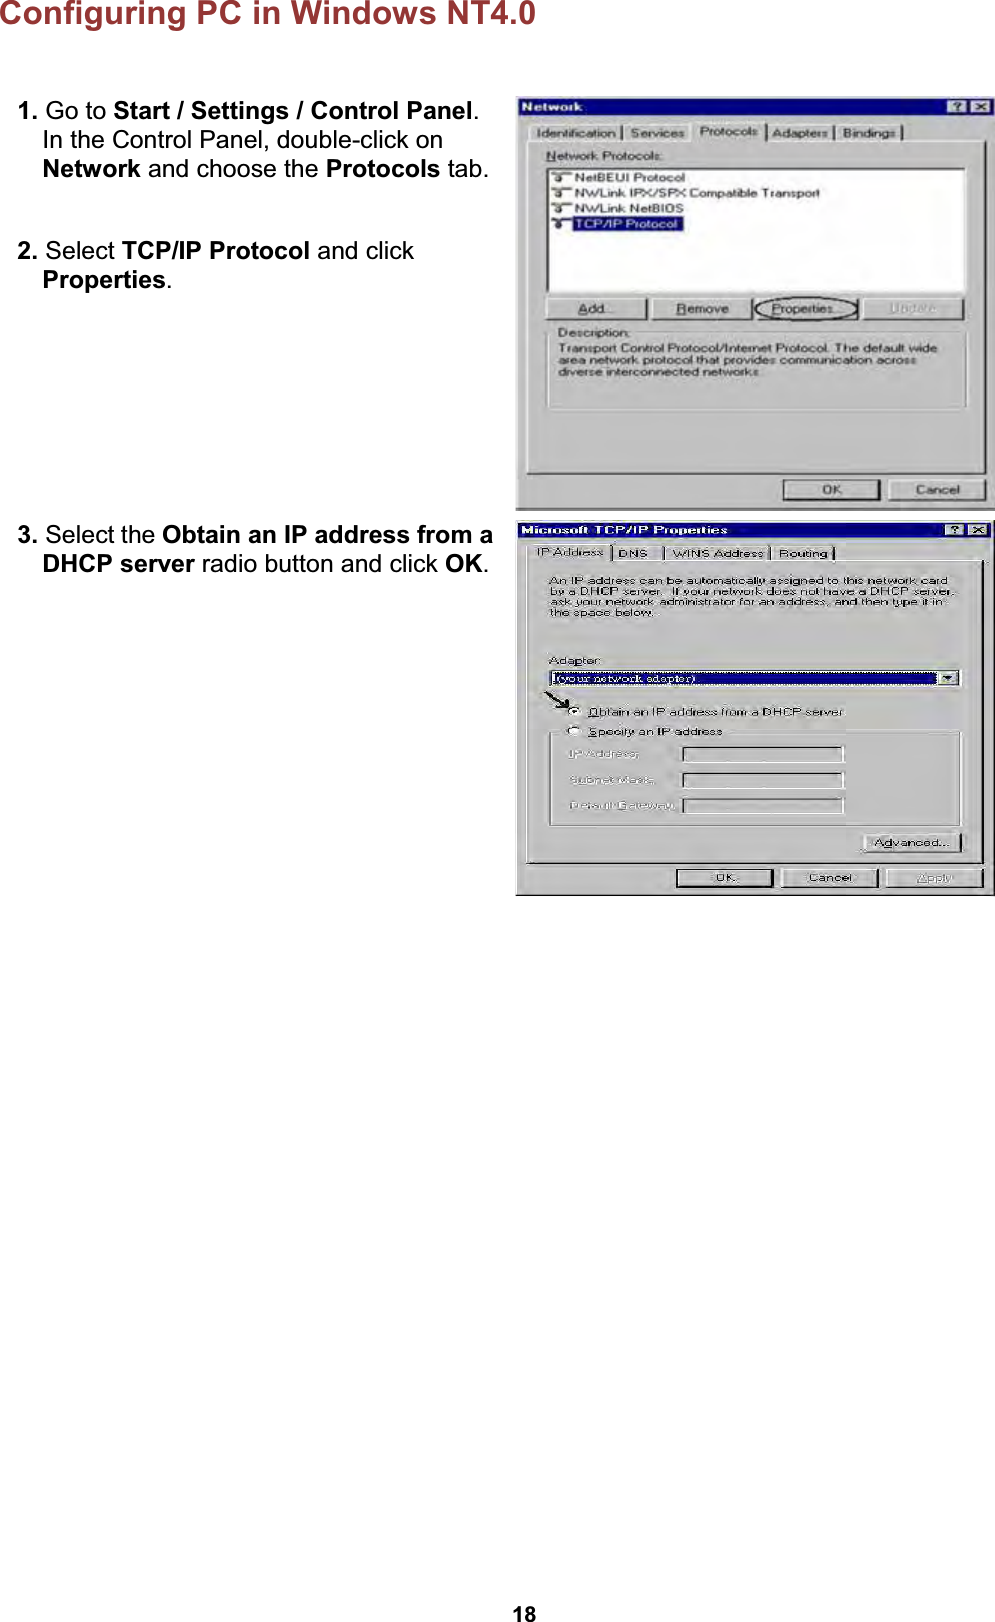  18 Configuring PC in Windows NT4.0  1. Go to Start / Settings / Control Panel. In the Control Panel, double-click on Network and choose the Protocols tab.  2. Select TCP/IP Protocol and click Properties.   3. Select the Obtain an IP address from a DHCP server radio button and click OK.     